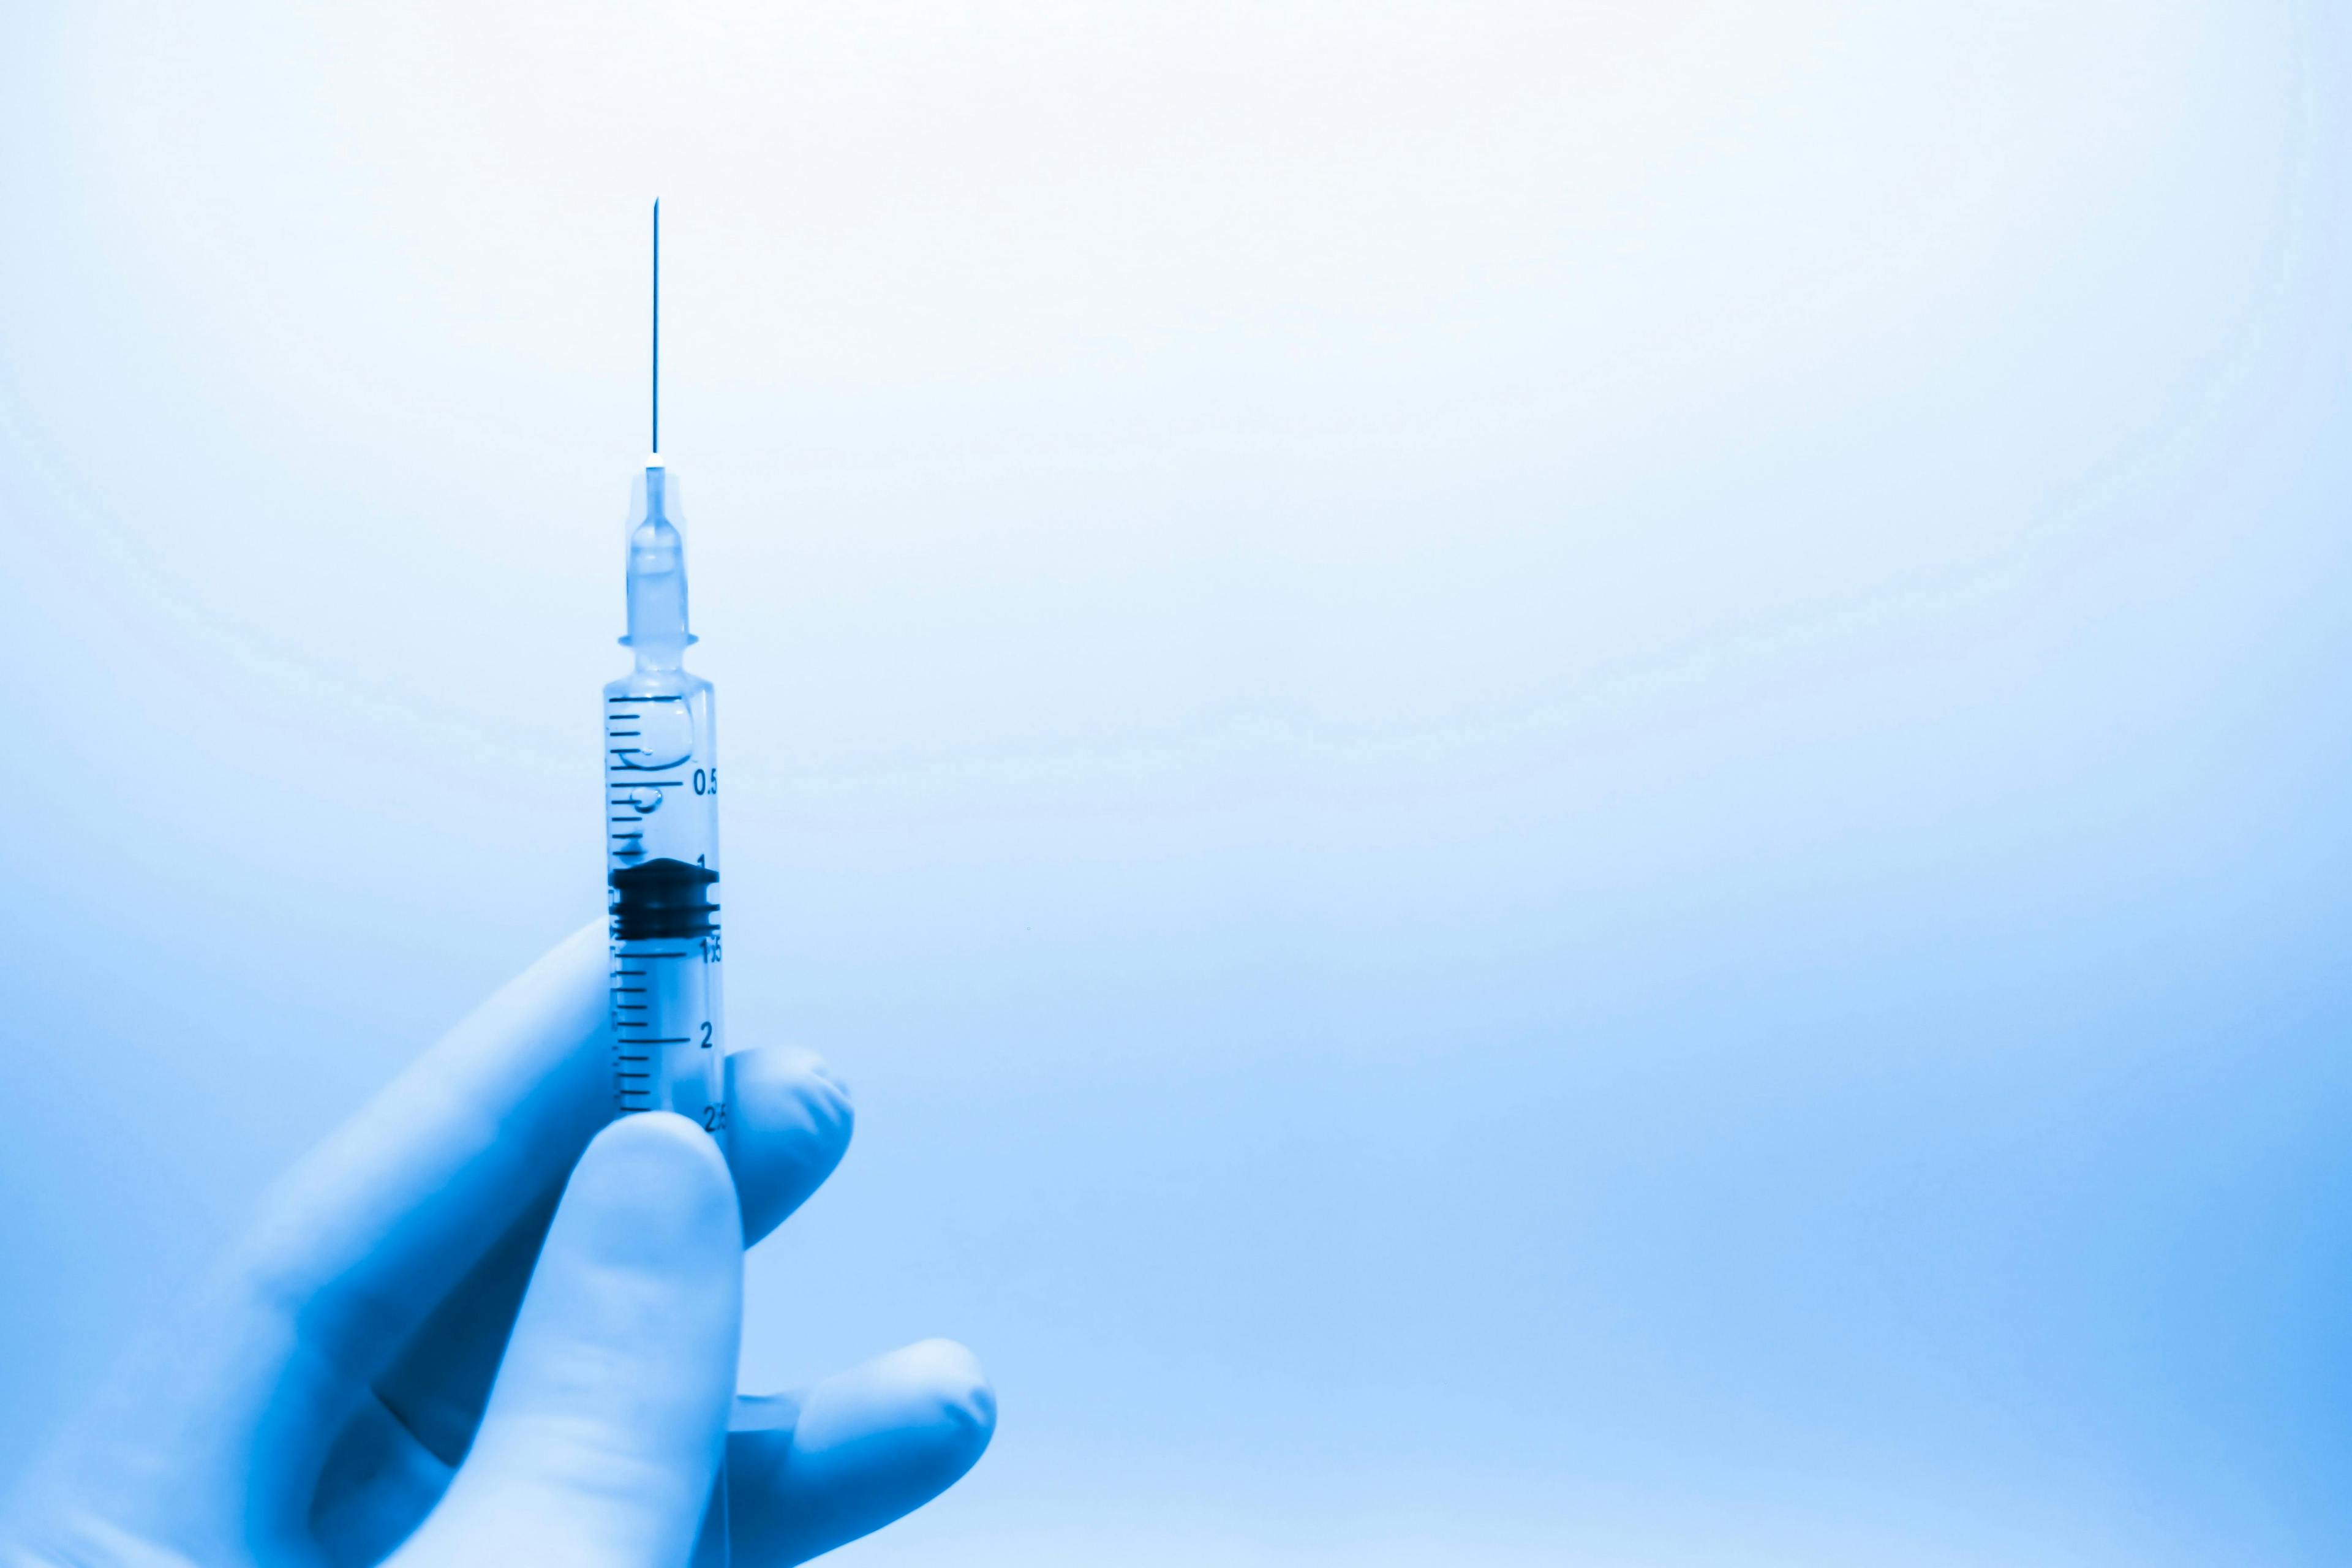 The primary ofatumumab injection reaction is typically development of a fever | image credit: Trsakaoe - stock.adobe.com